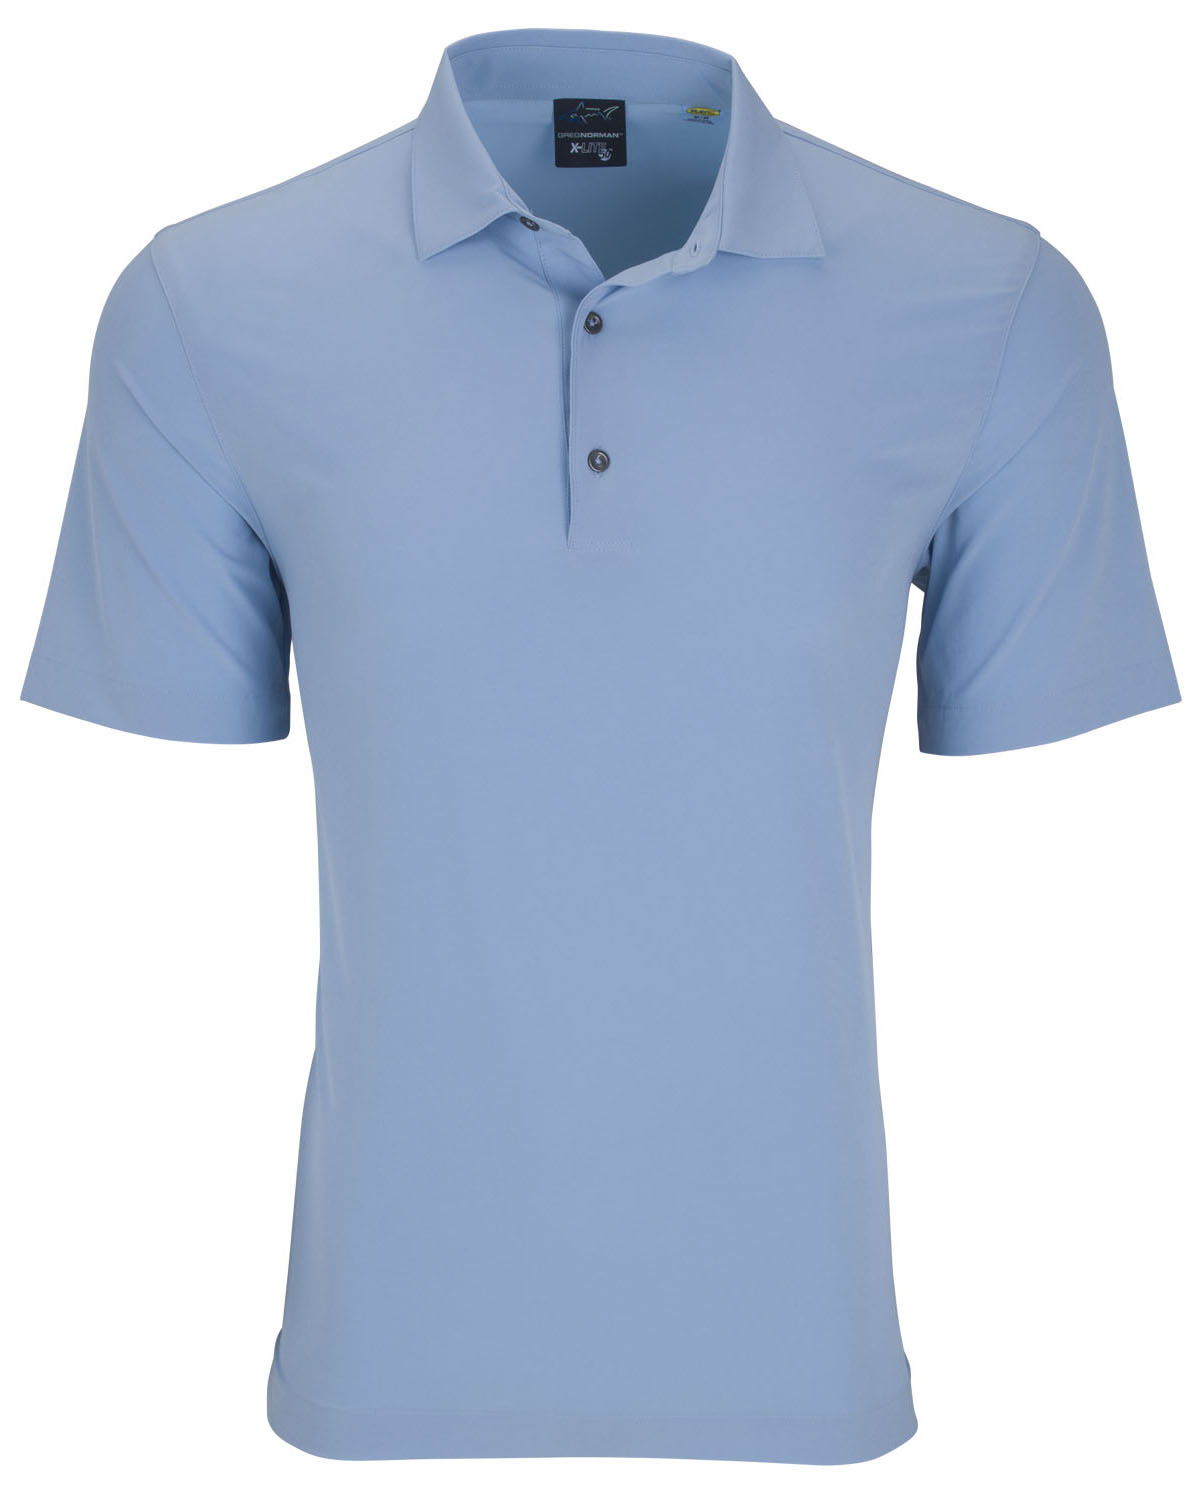 Greg Norman Mens X-lite 50 Solid Polo